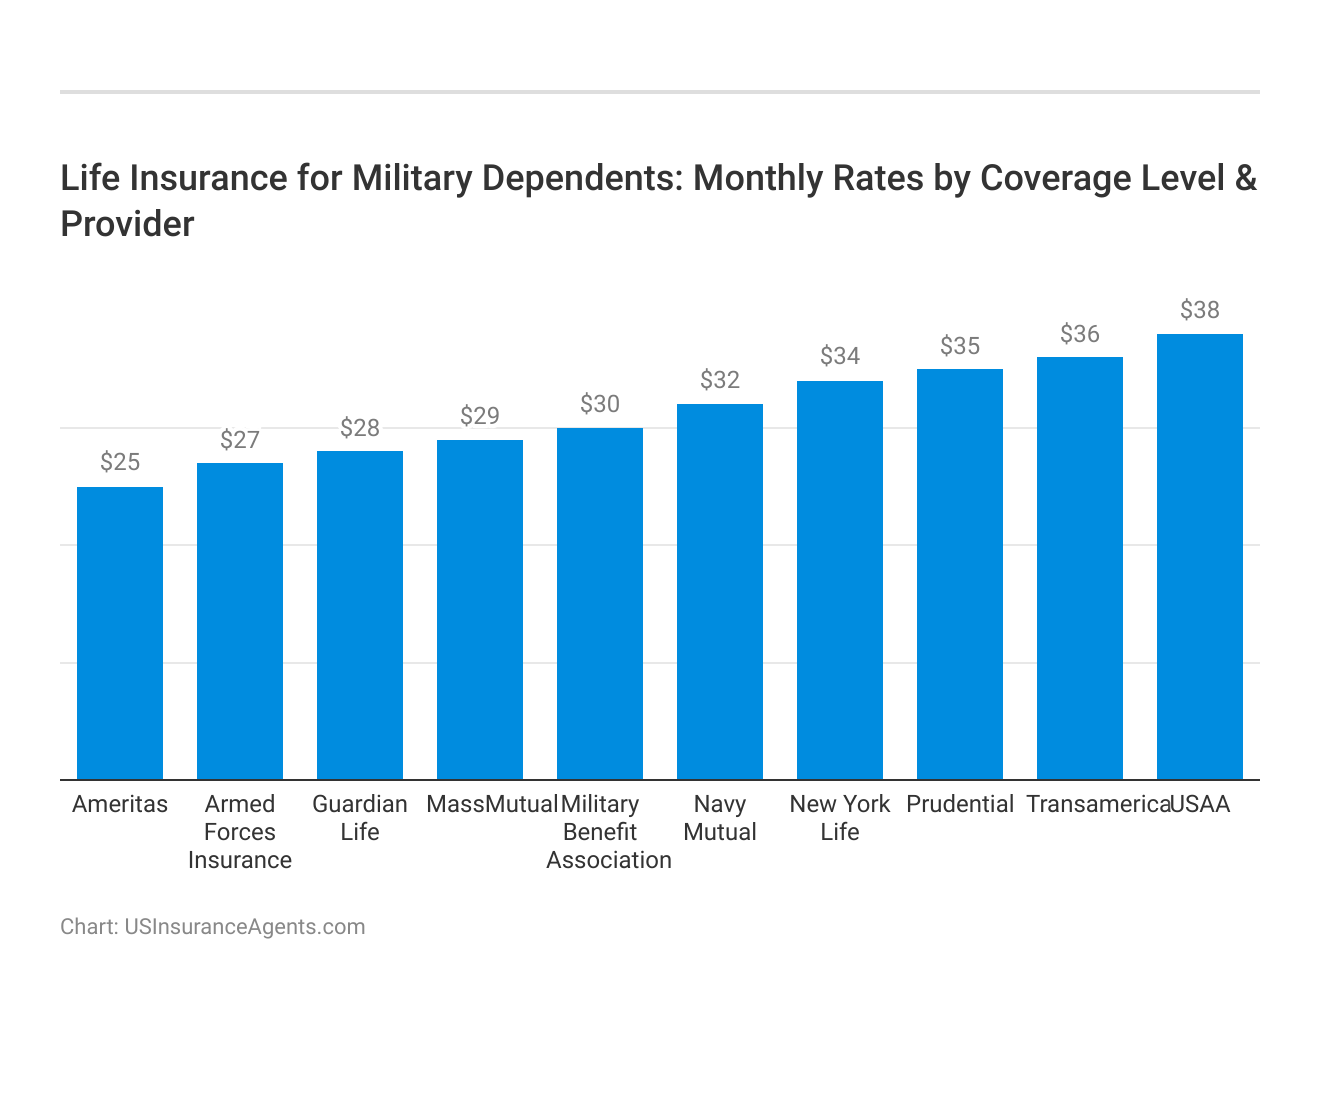 <h3>Life Insurance for Military Dependents: Monthly Rates by Coverage Level & Provider</h3>